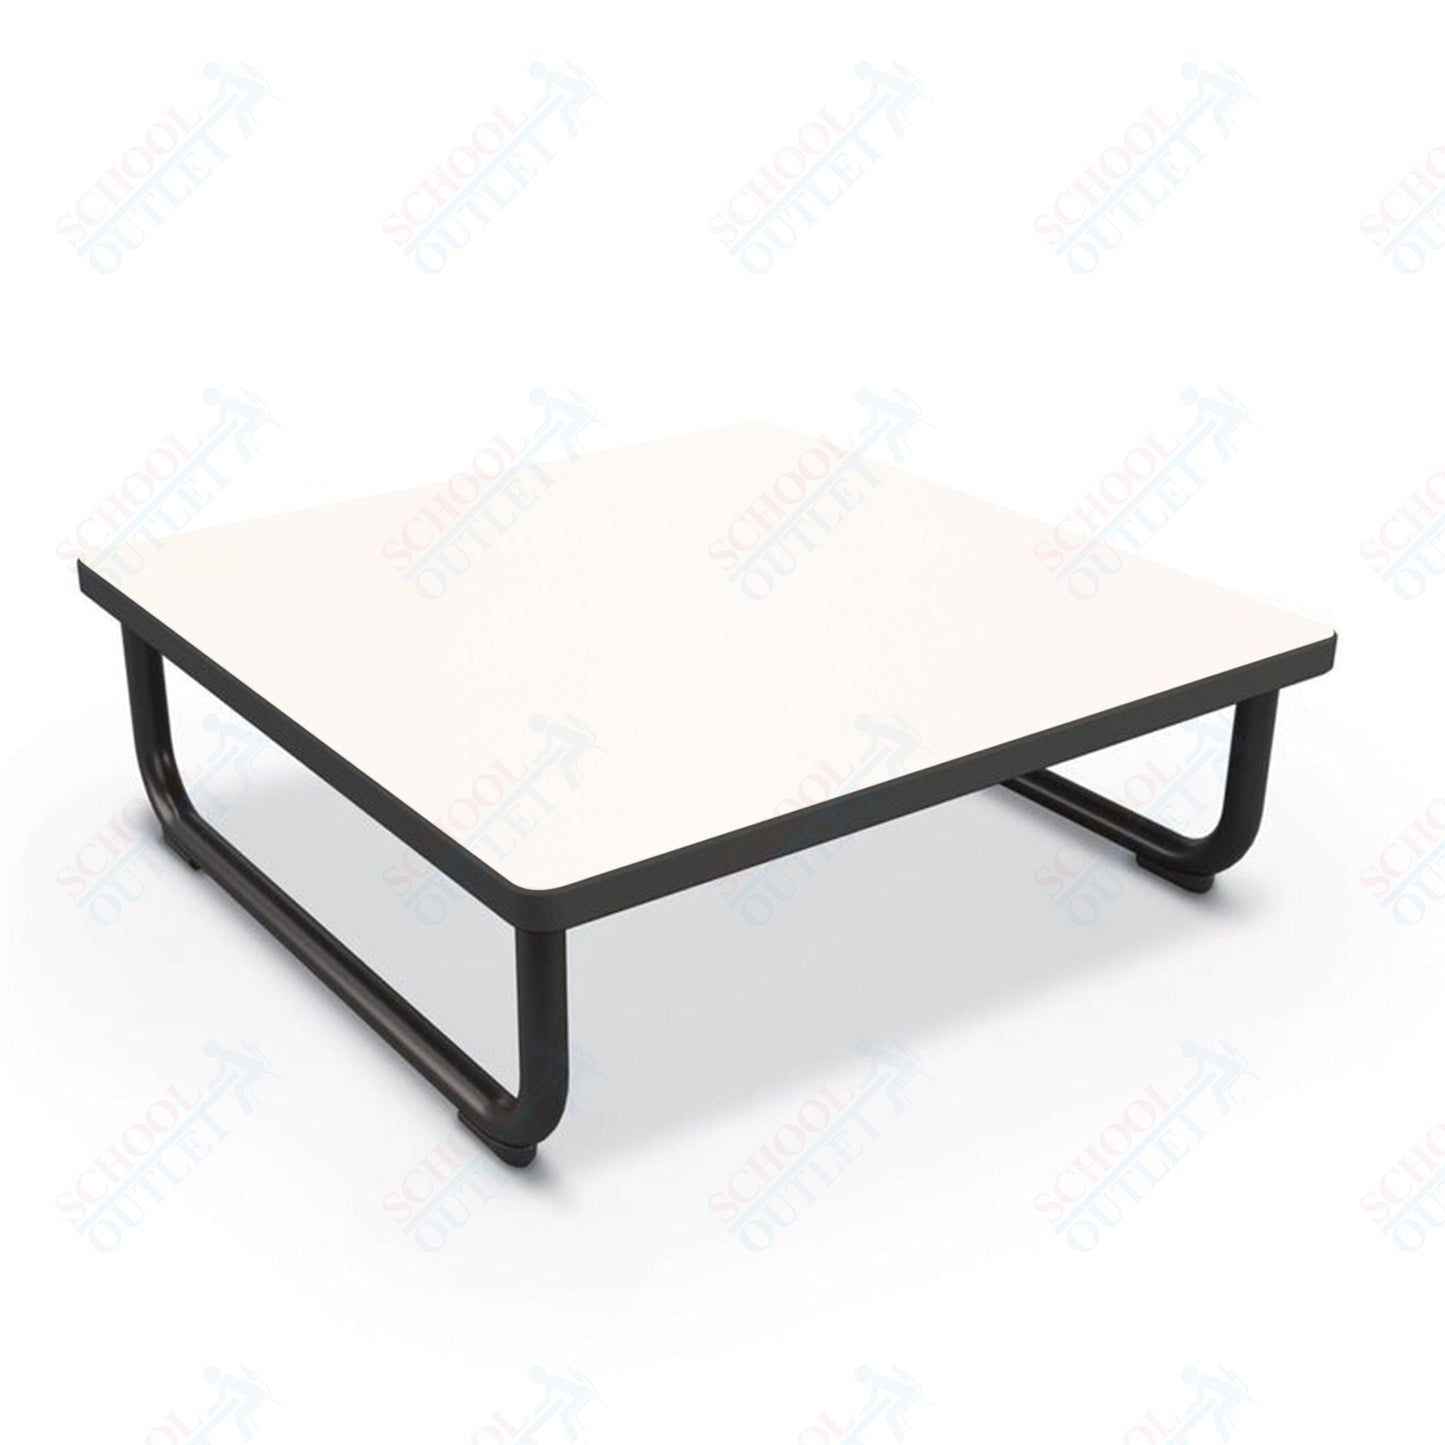 Mooreco Akt Lounge Single Seat Table - High - pressure Laminate (HPL) Top Surface - SchoolOutlet